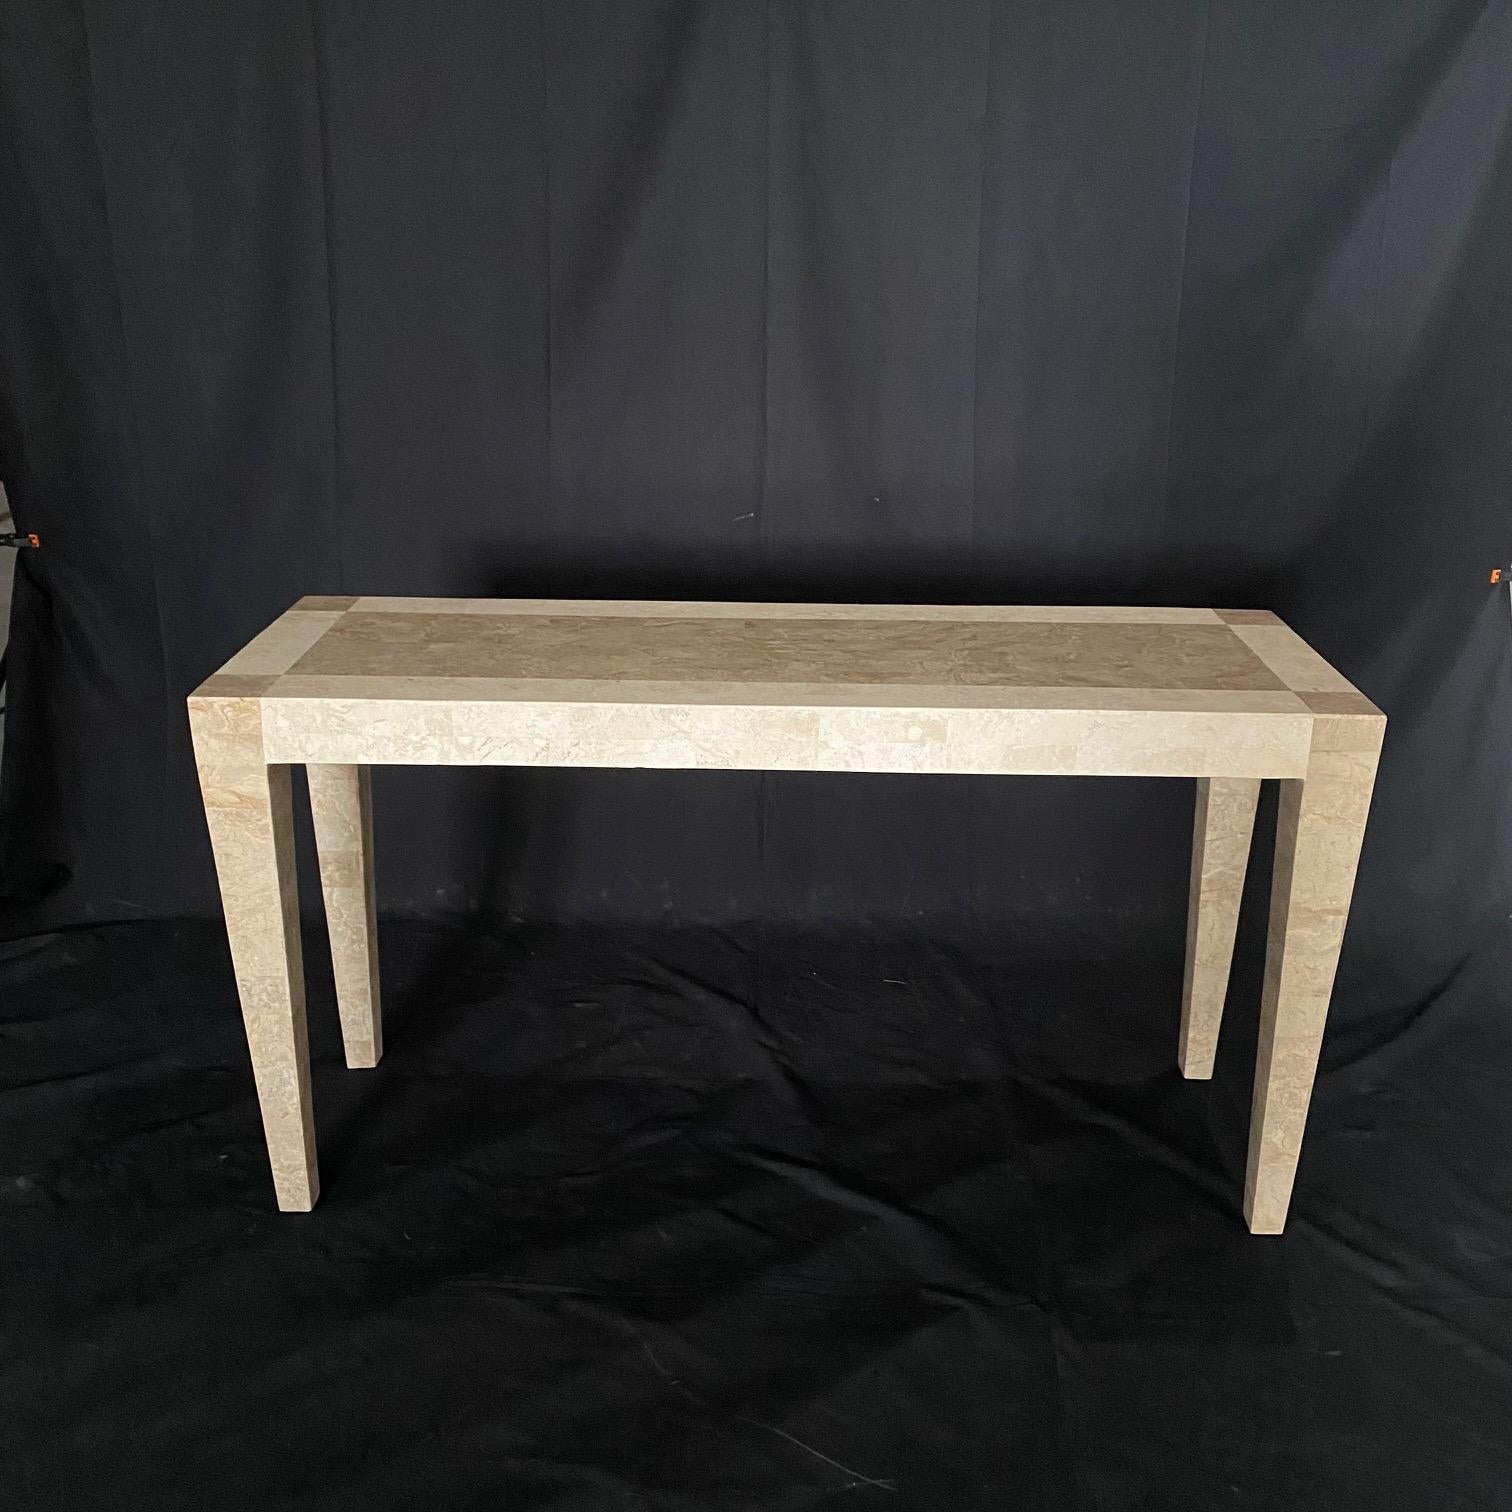 A vintage marble tessellated stone veneer console table featuring lovely off white and beige colored marble with inlaid borders.

#2802.